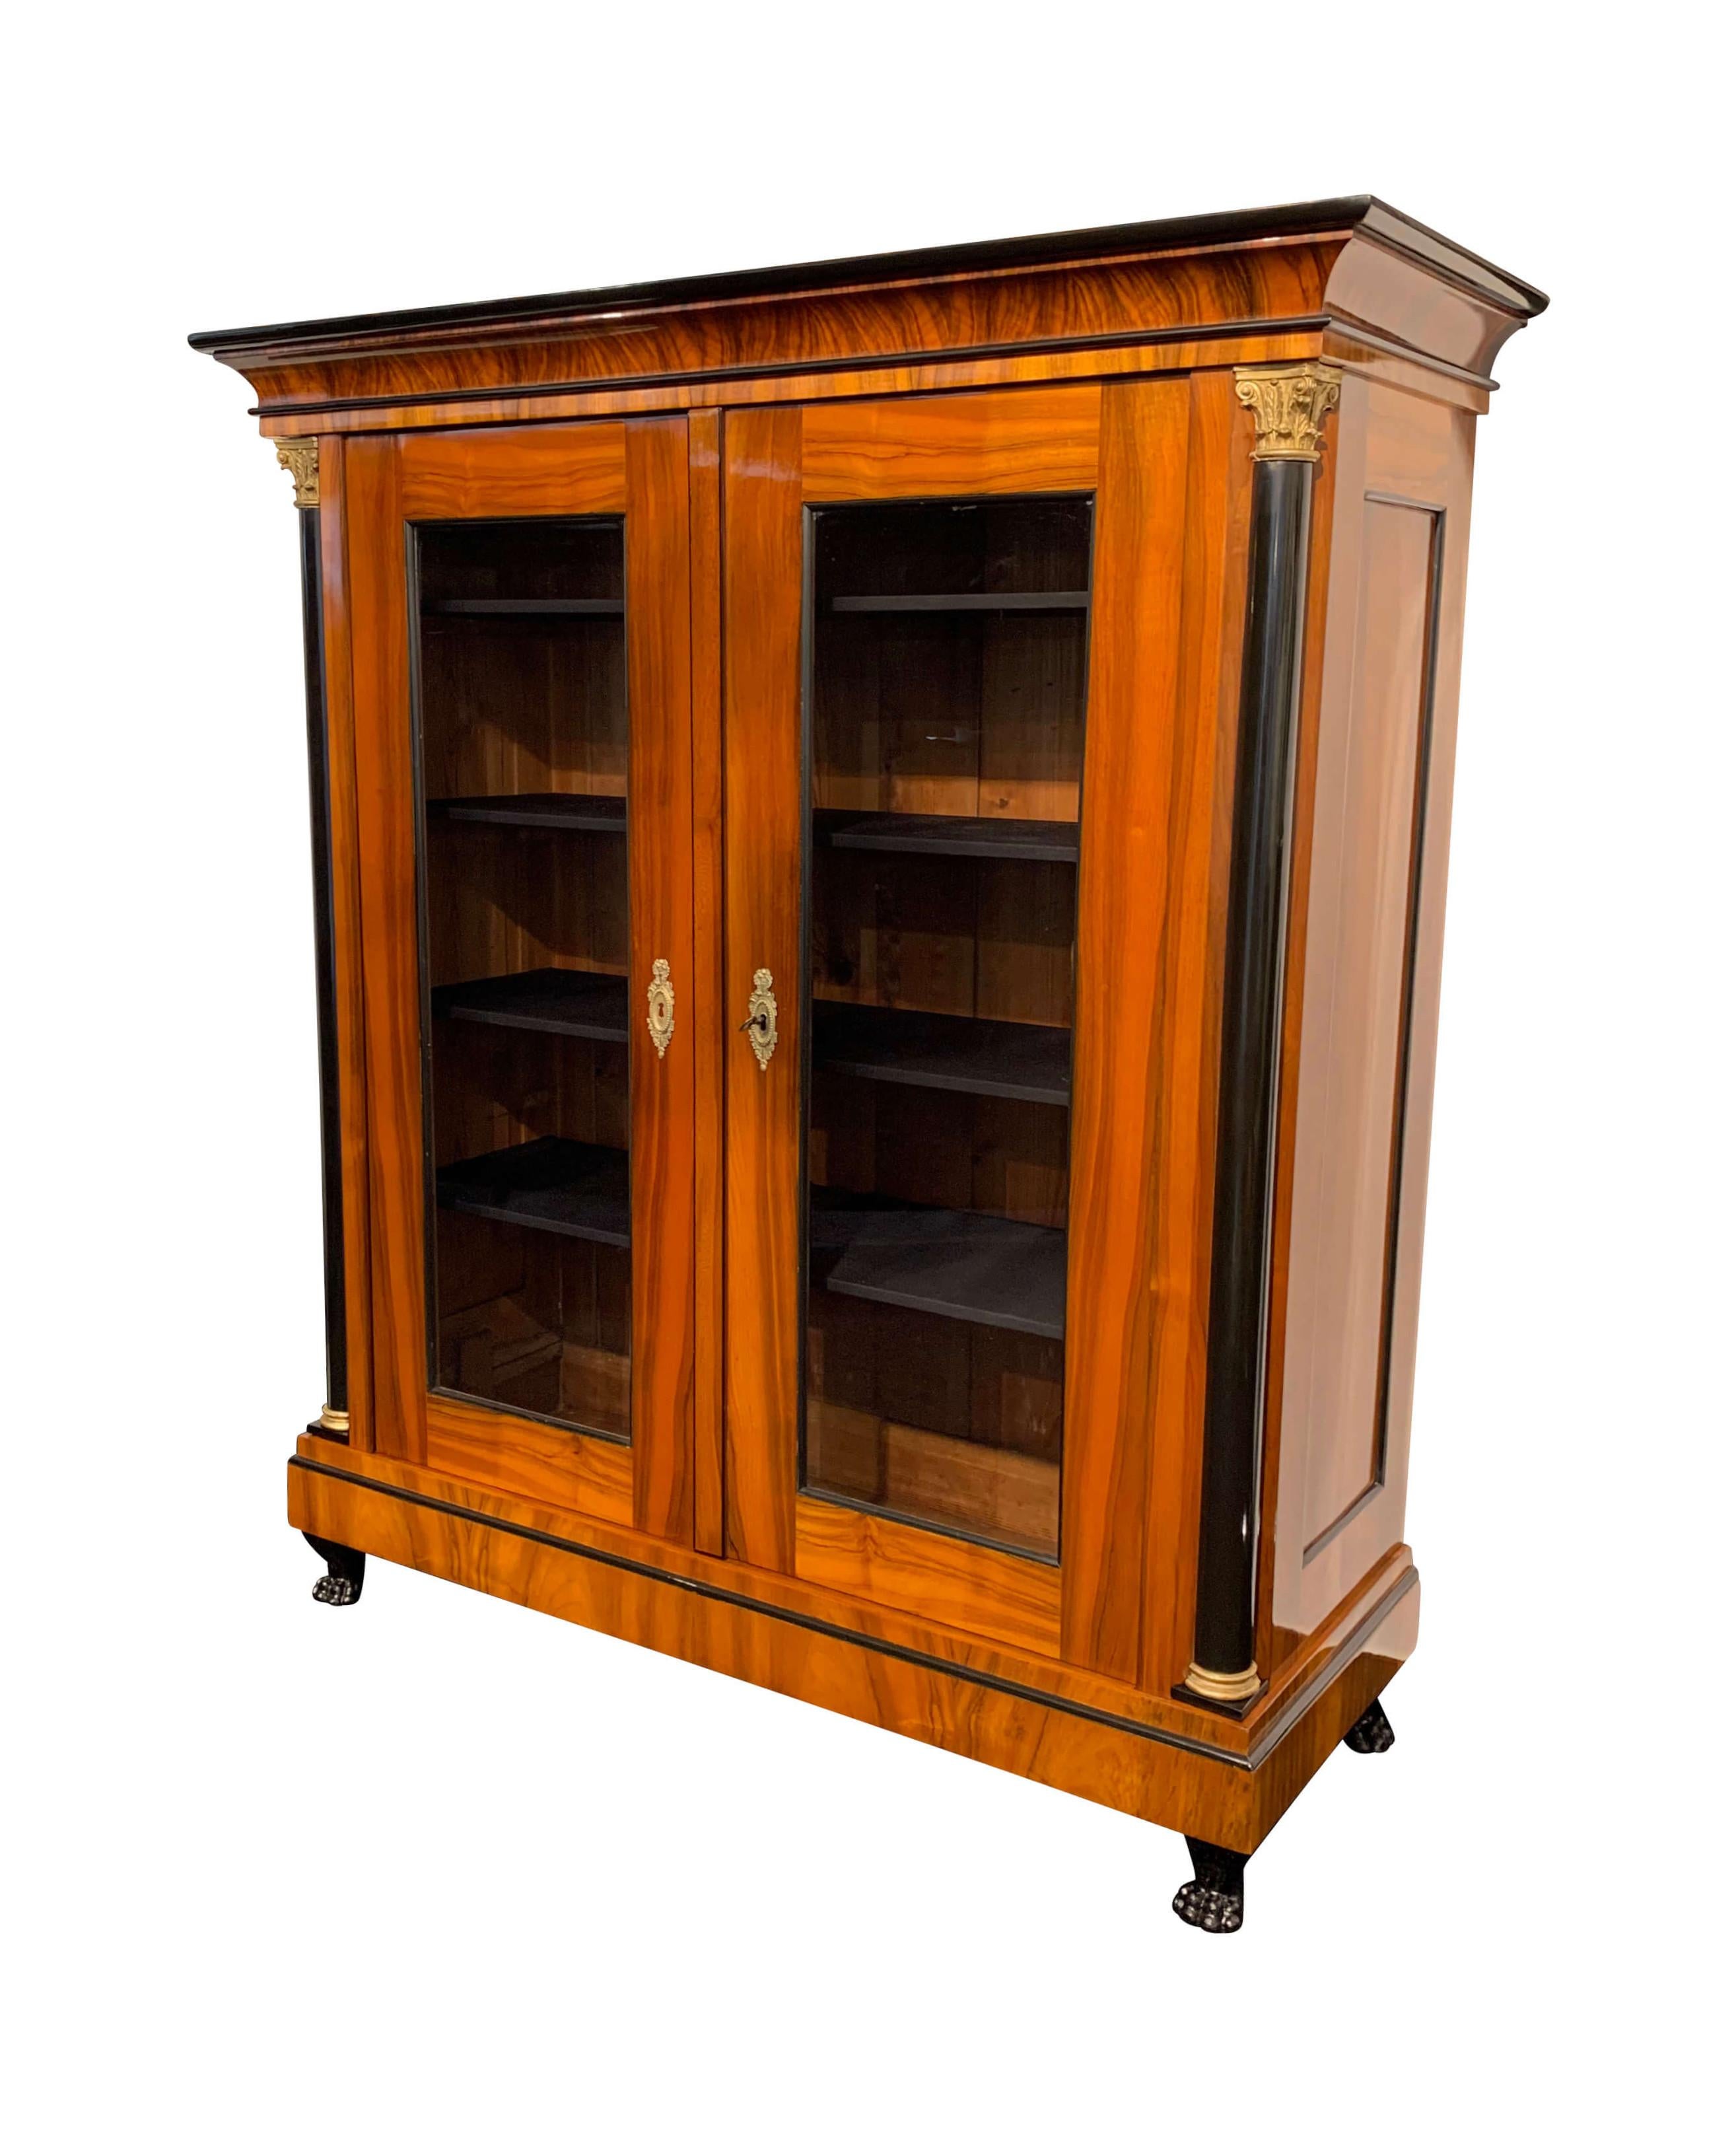 Large, impressive original Biedermeier showcase armoire / display cabinet from South Germany, about 1820/25.

Walnut veneer and solid, hand-polished with shellac (French polish). Nicely worked, classicist concave cornice. Set, ebonized